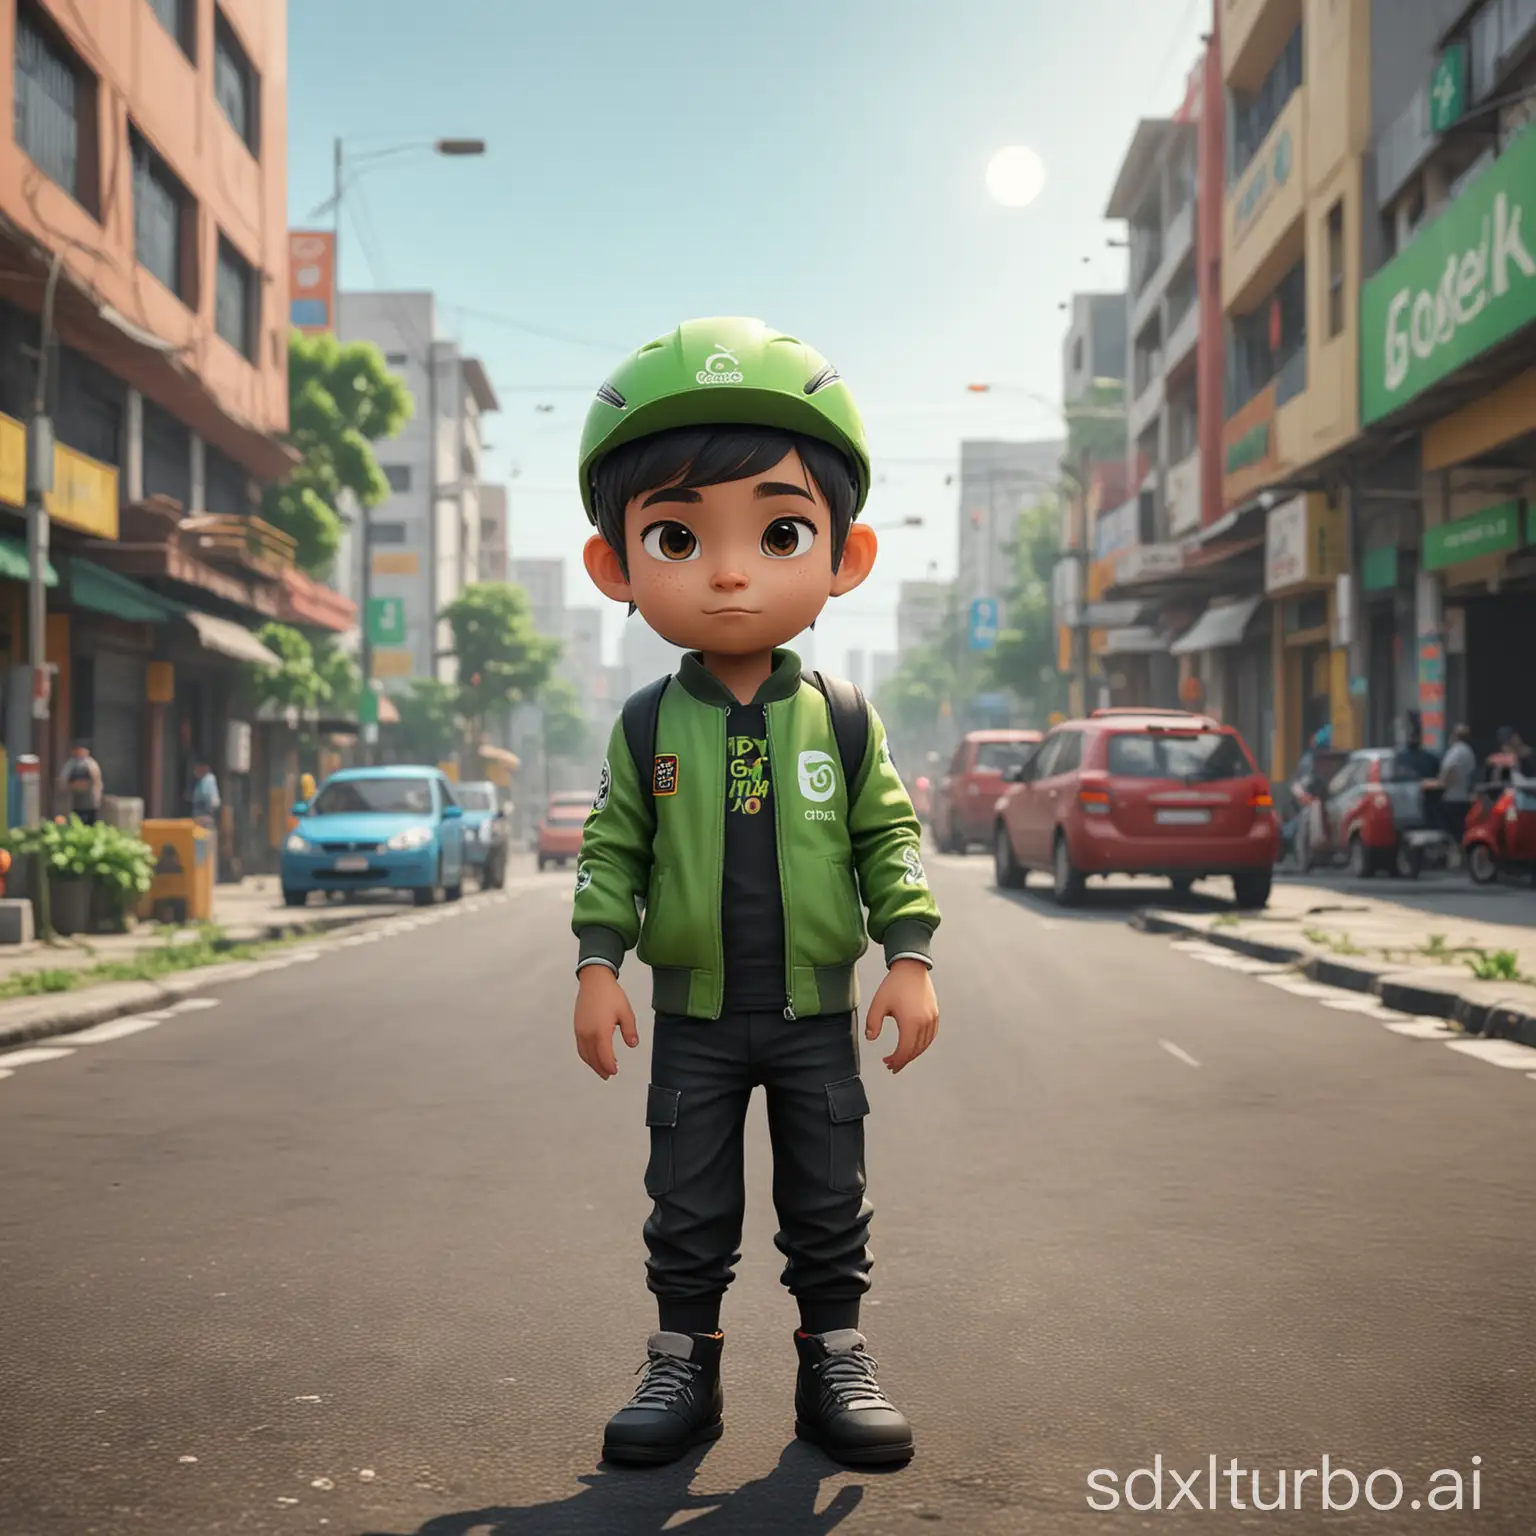 Adorable-Little-Gojek-Driver-Game-Character-Standing-Tall